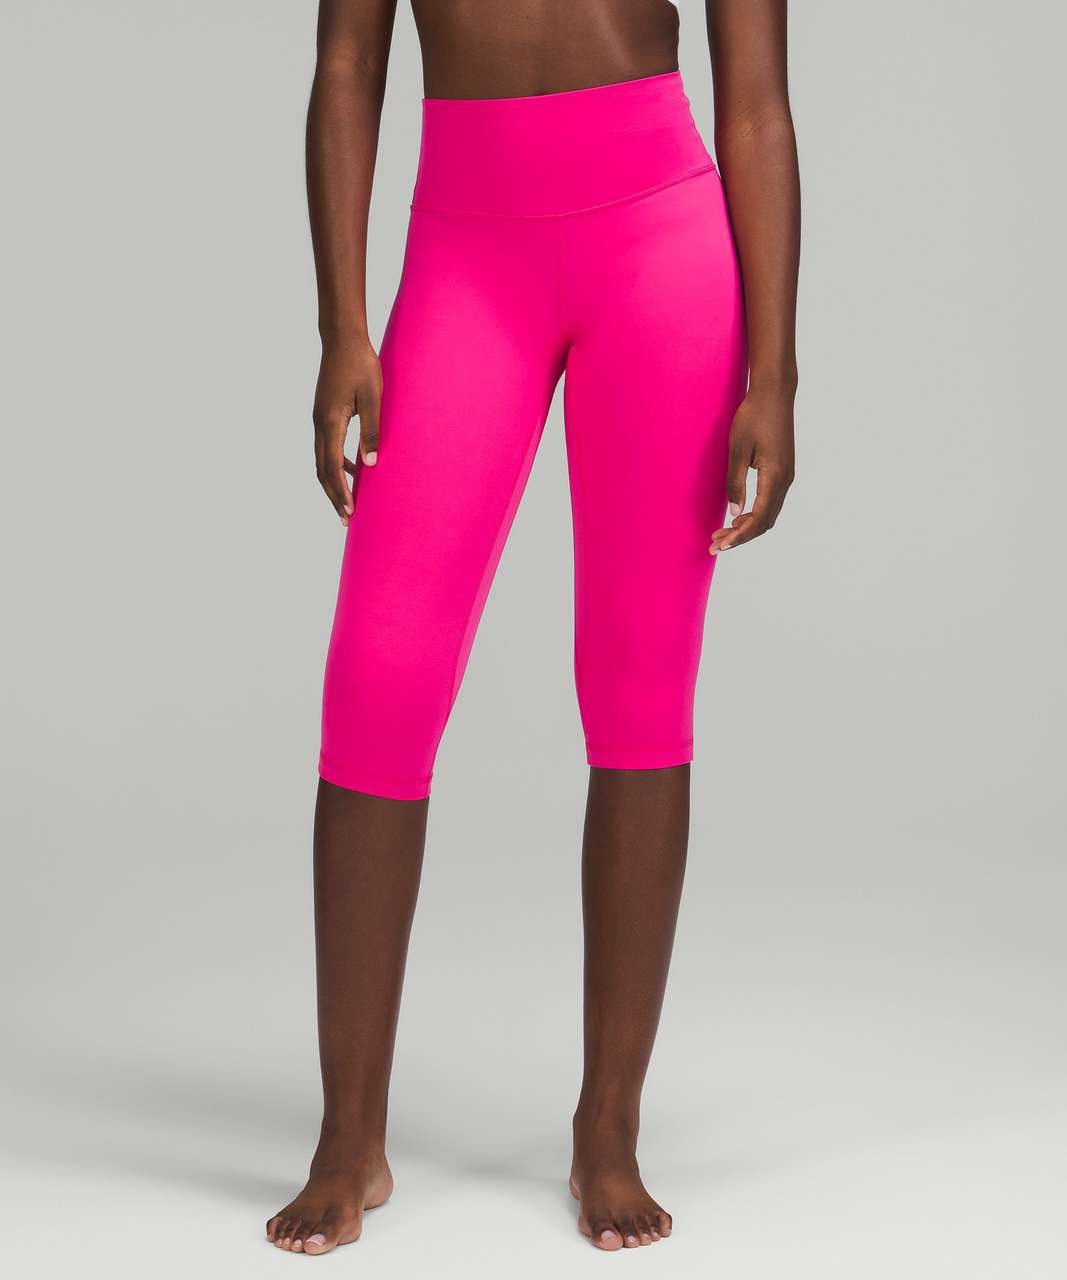 Lululemon Align High-rise Pant 25” in Sonic Pink - Women's Size 20